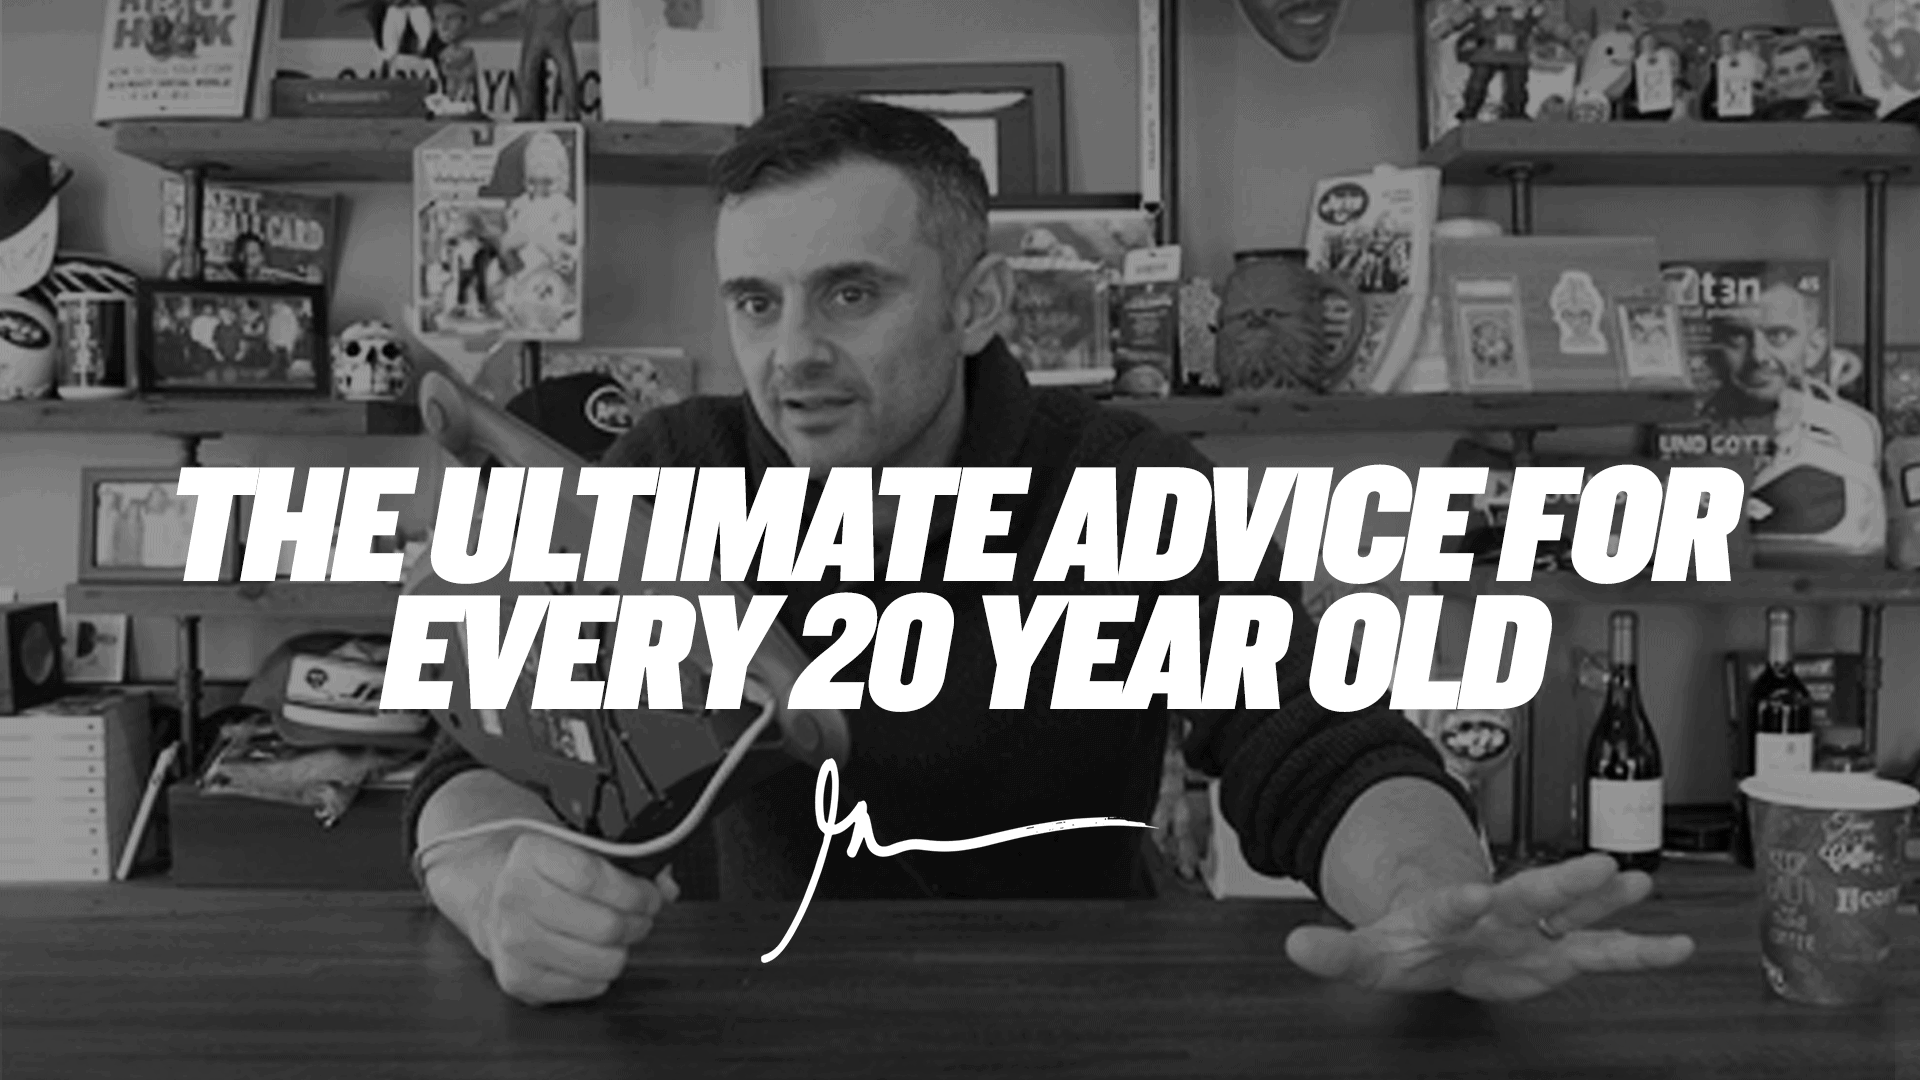 The Ultimate Advice for Every 20 Year Old